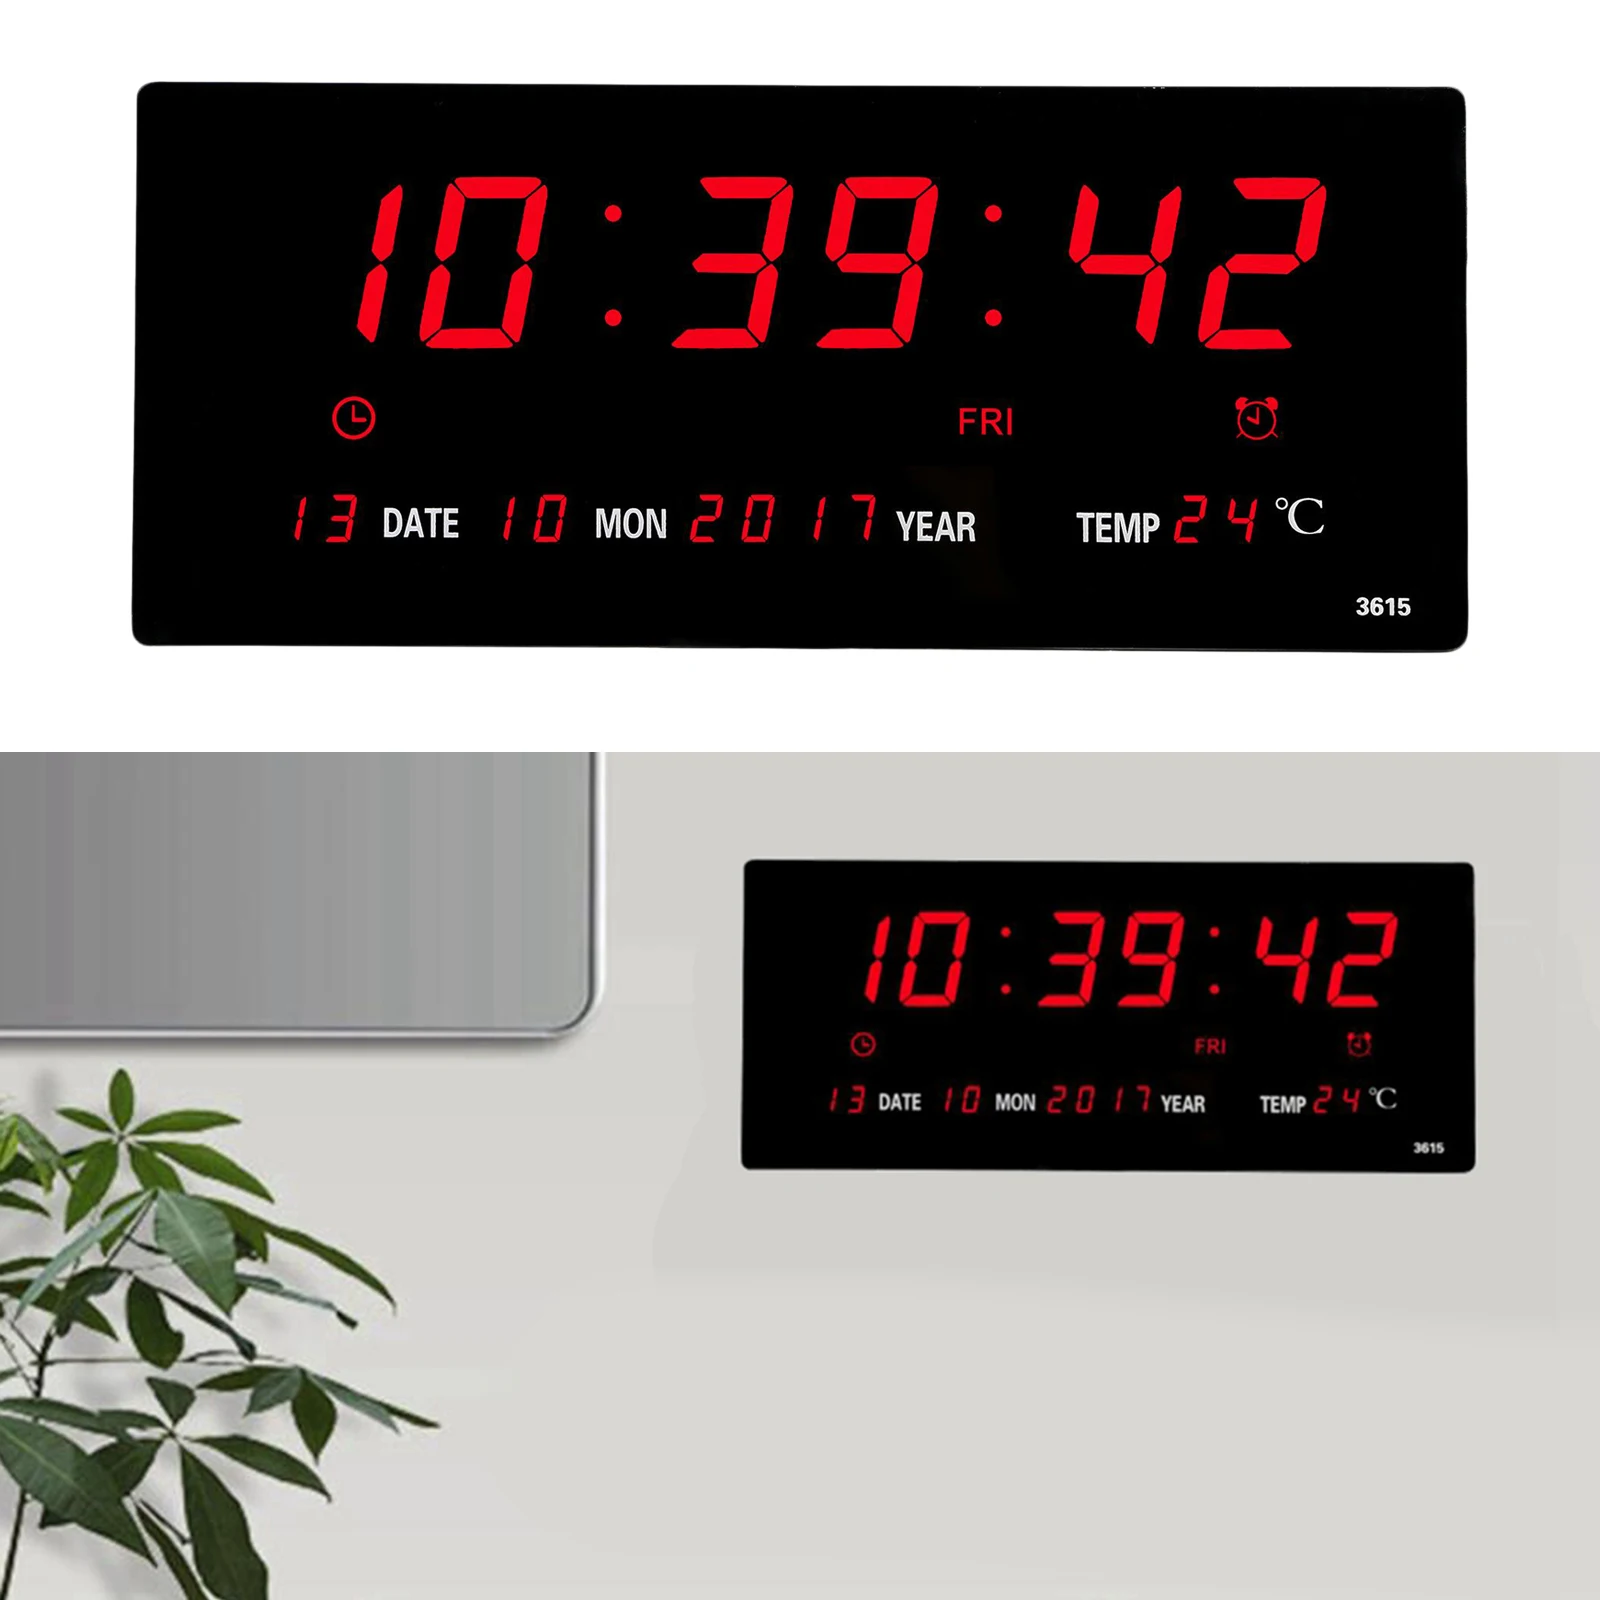 LED Digital Wall Clock Calendar Large Display w/ Indoor Temperature Date and Day